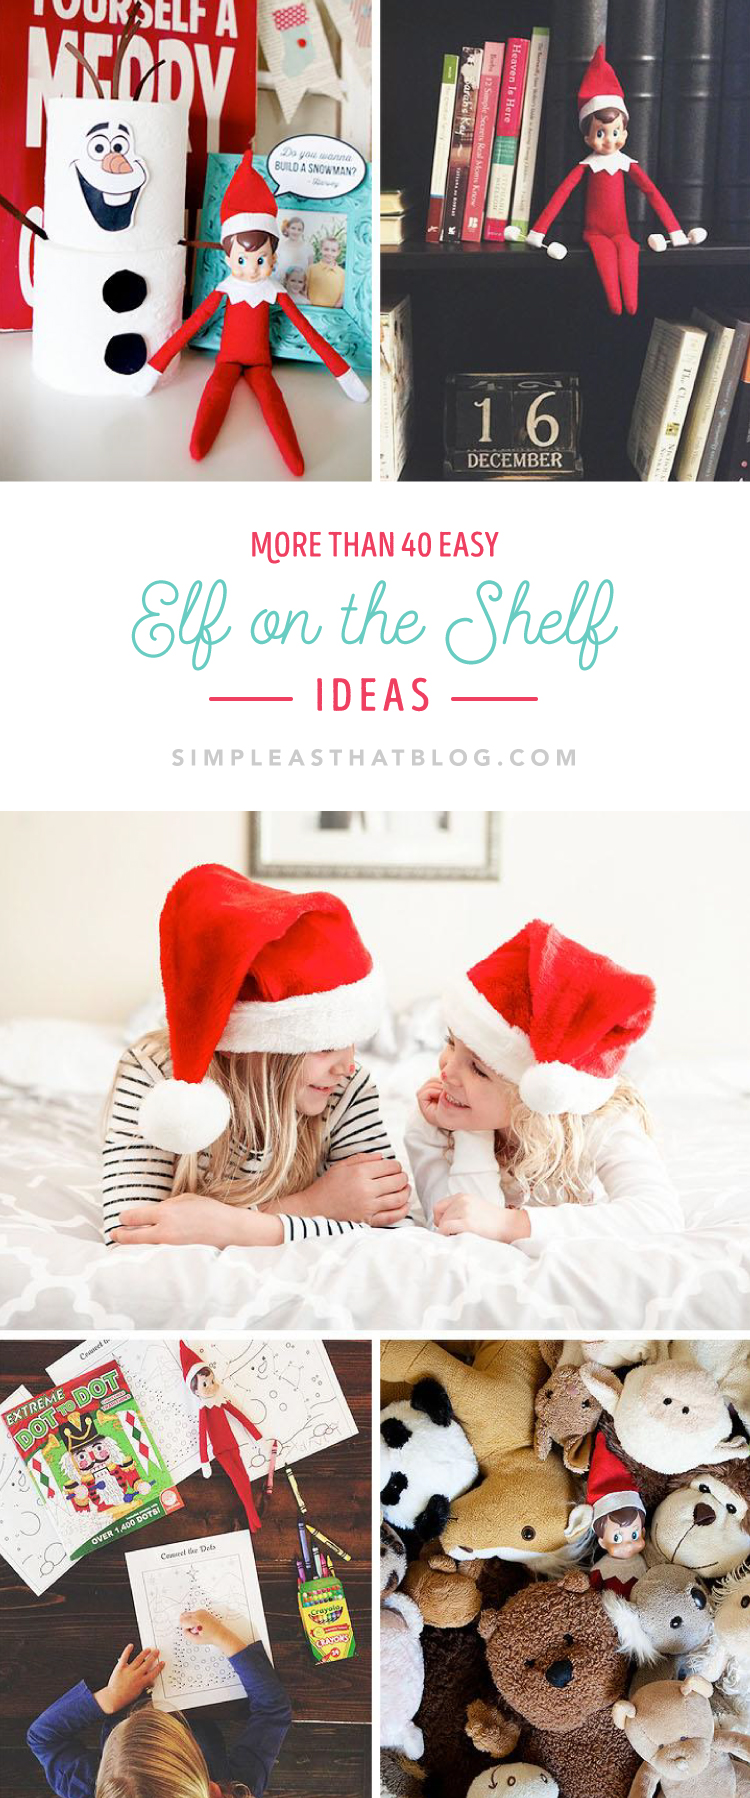 More than 40 Easy Elf on the Shelf Ideas to help you keep this tradition fun and stress-free!